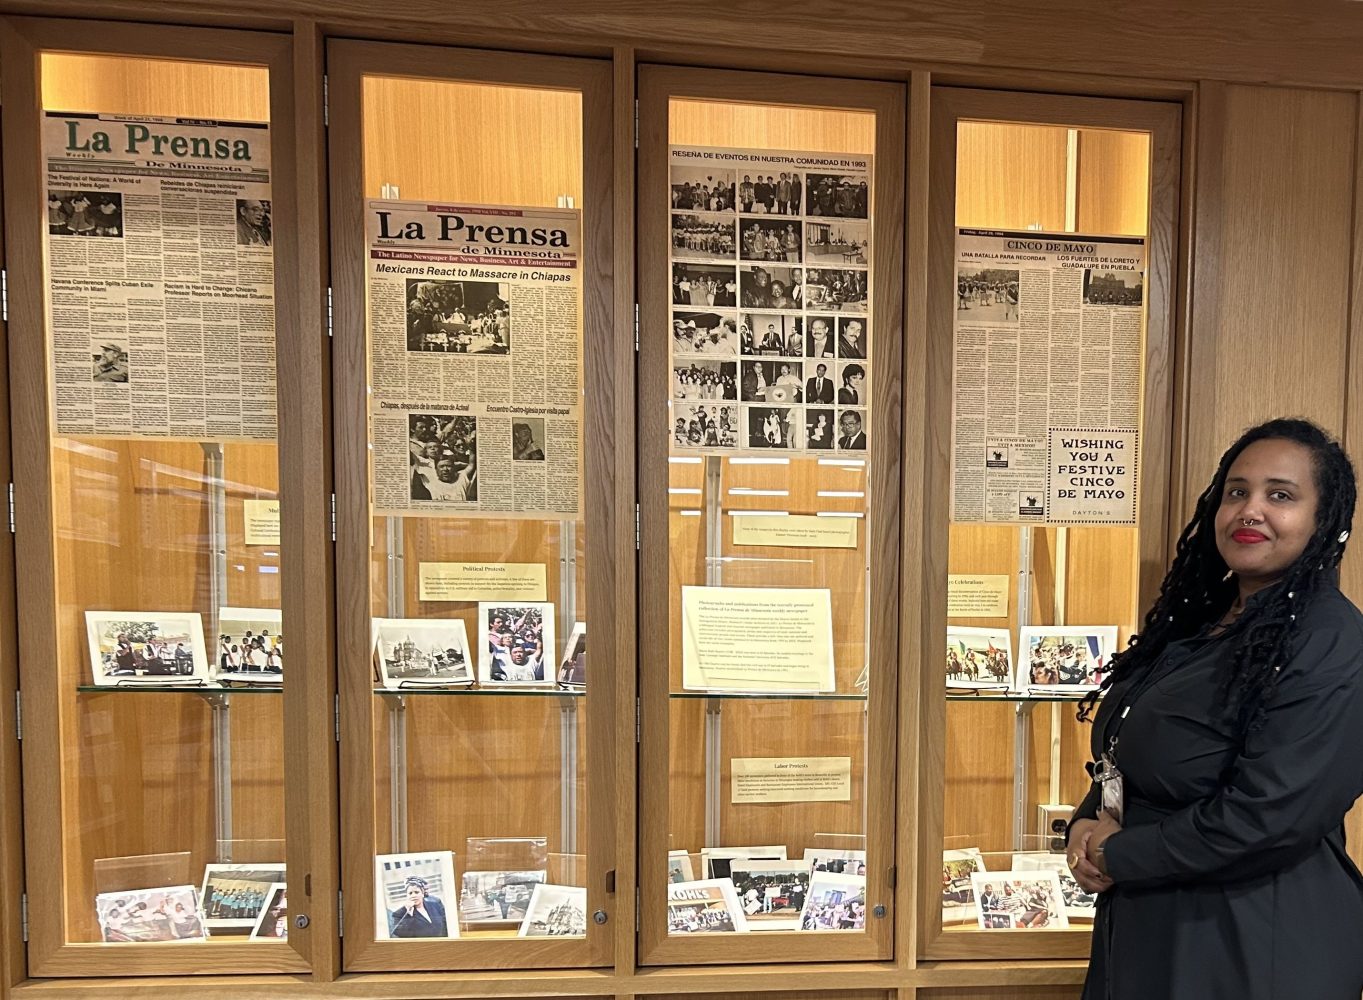 Ayantu Tibeso stands in front of the display case outside IHRCA, sharing some of the "La Prensa de Minnesota" materials.